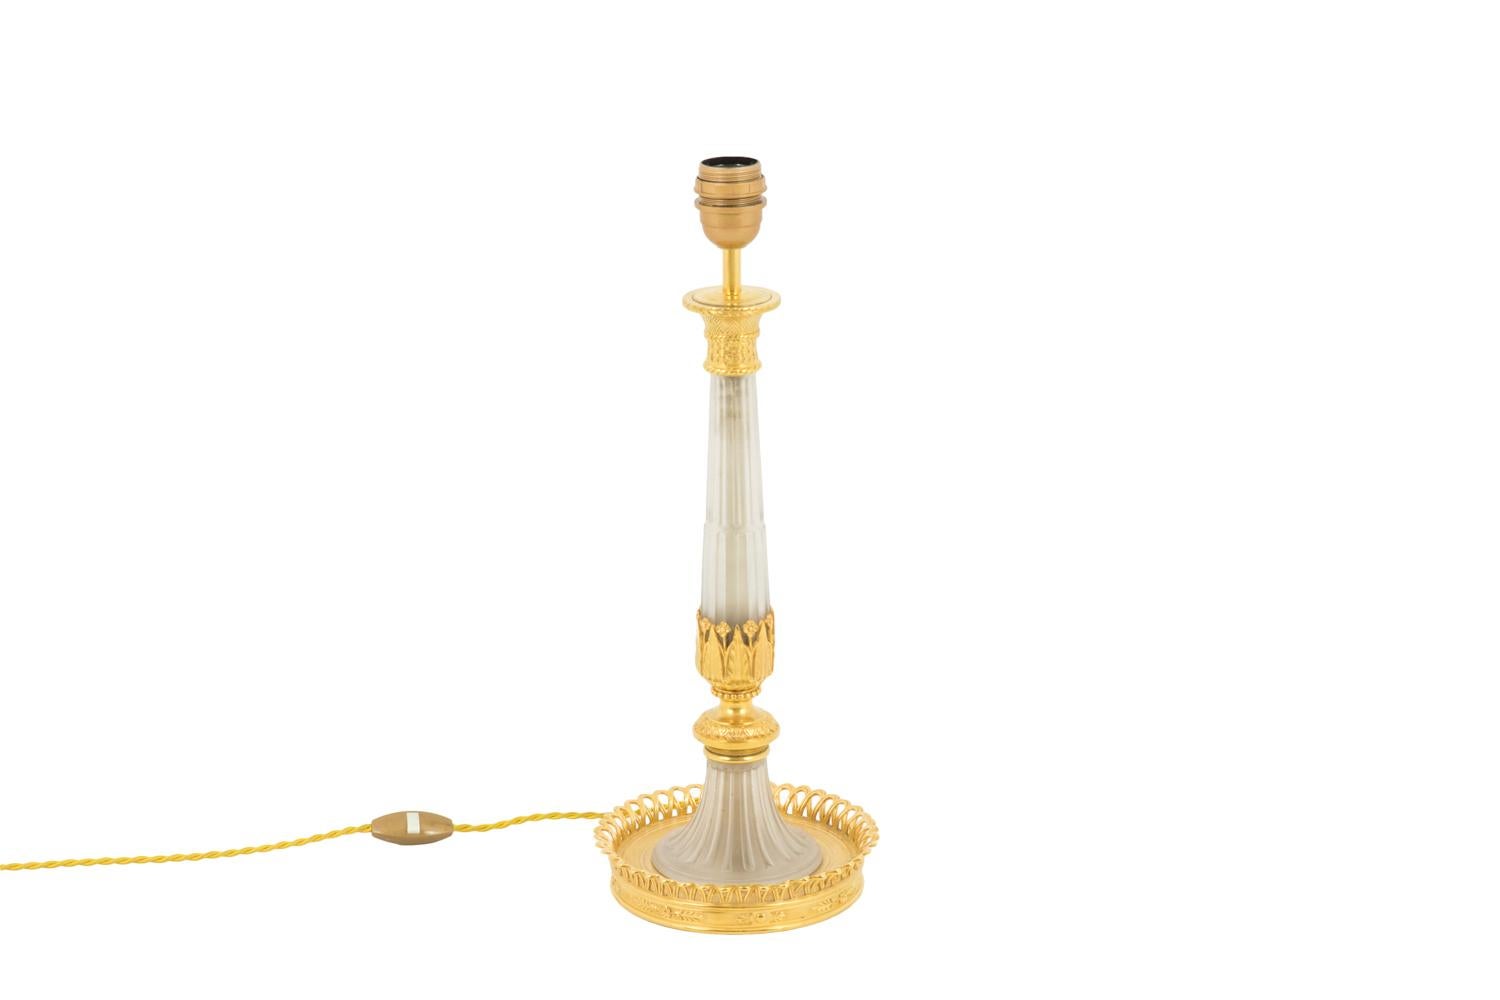 Directoire style lamp in large candleholder shape in glass and gilt bronze. Fluted baluster shape shaft in polished transparent glass topped by a capital in braided basket shape. It is finished by gilt bronze motifs of leaves, small flowers, a beads